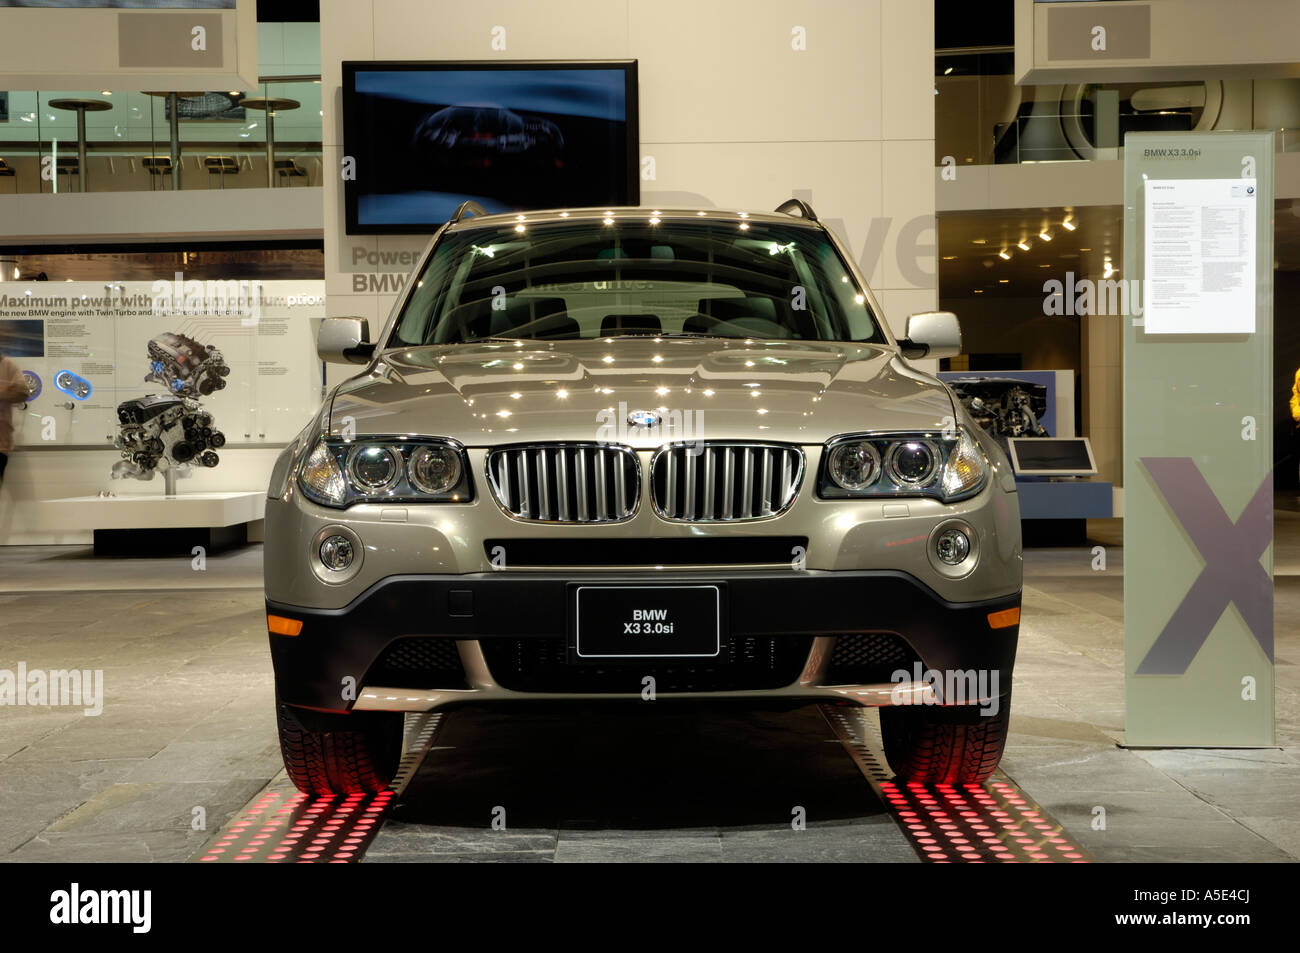 2007 BMW X3 3.0si at the 2007 North American International Auto Show in Detroit Michigan USA Stock Photo